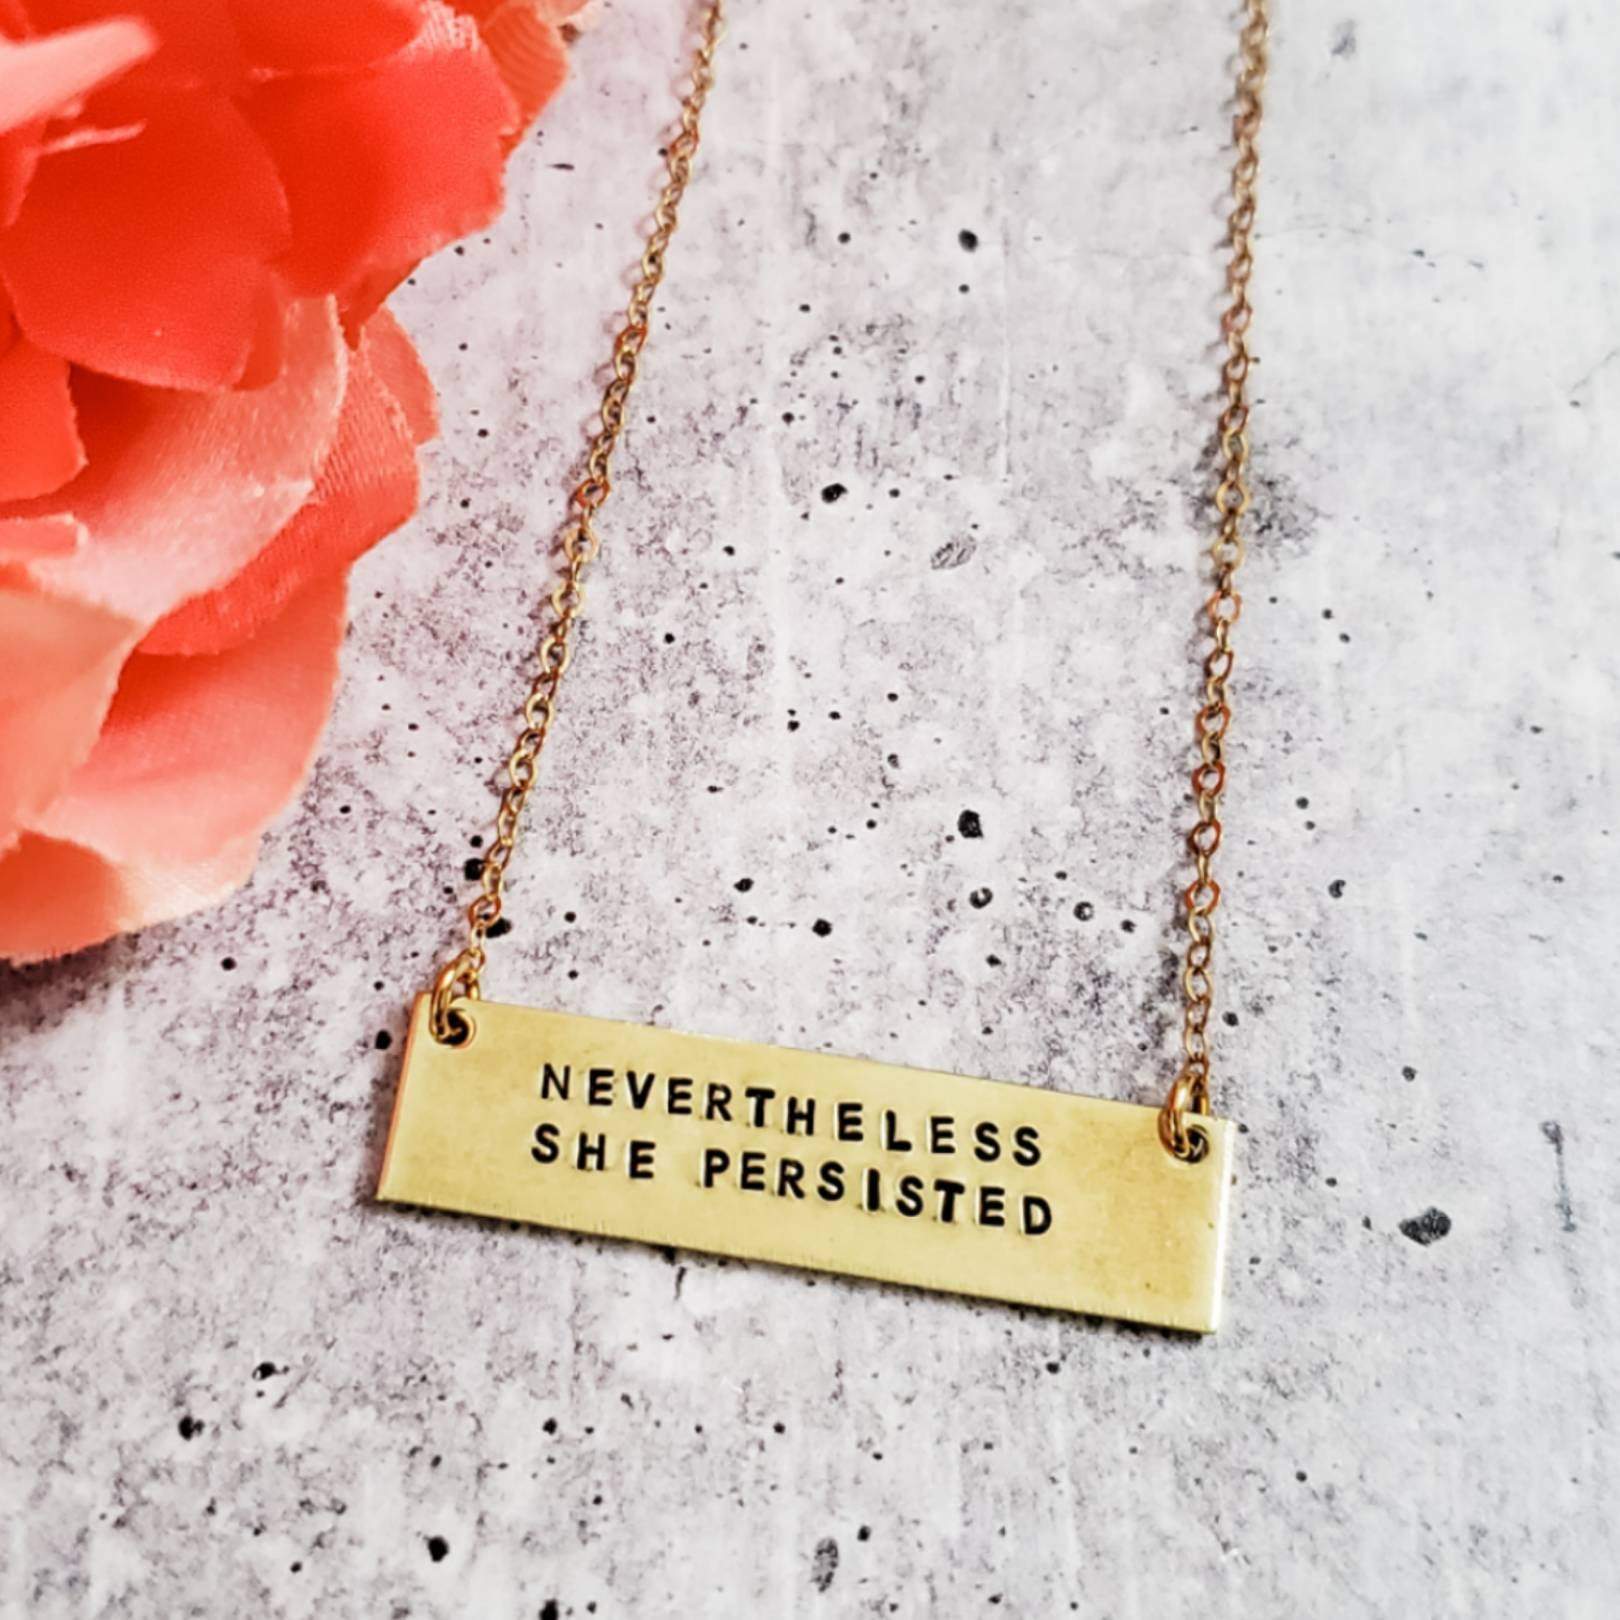 NEVERTHELESS SHE PERSISTED Brass Bar Necklace Salt and Sparkle